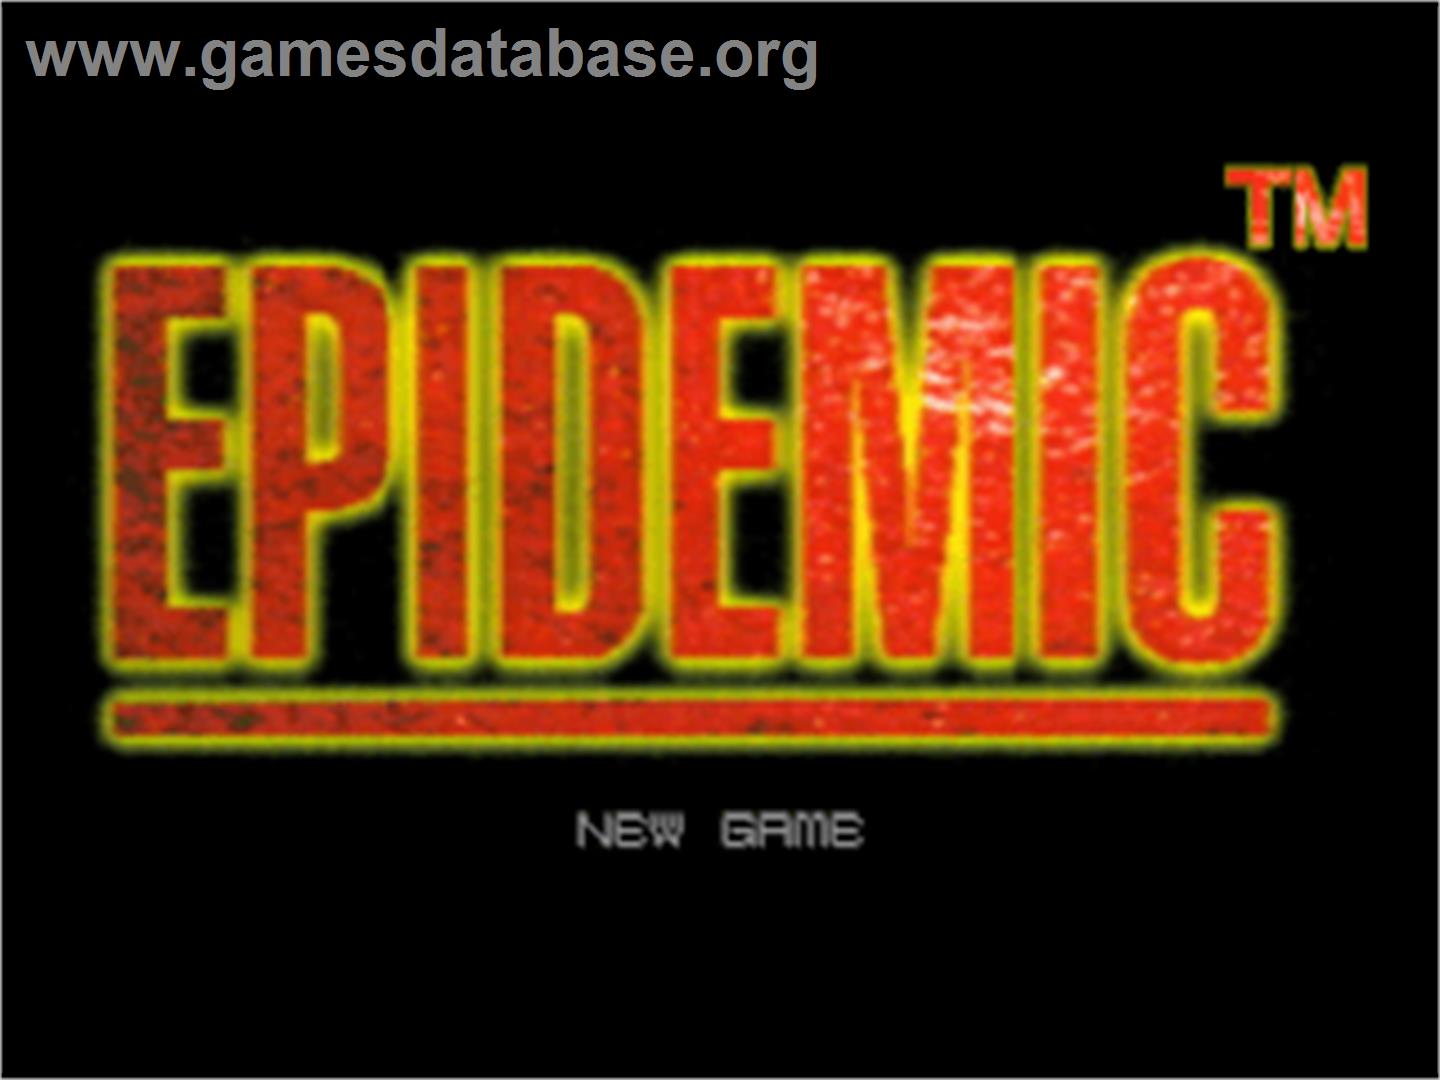 Epidemic - Sony Playstation - Artwork - Title Screen